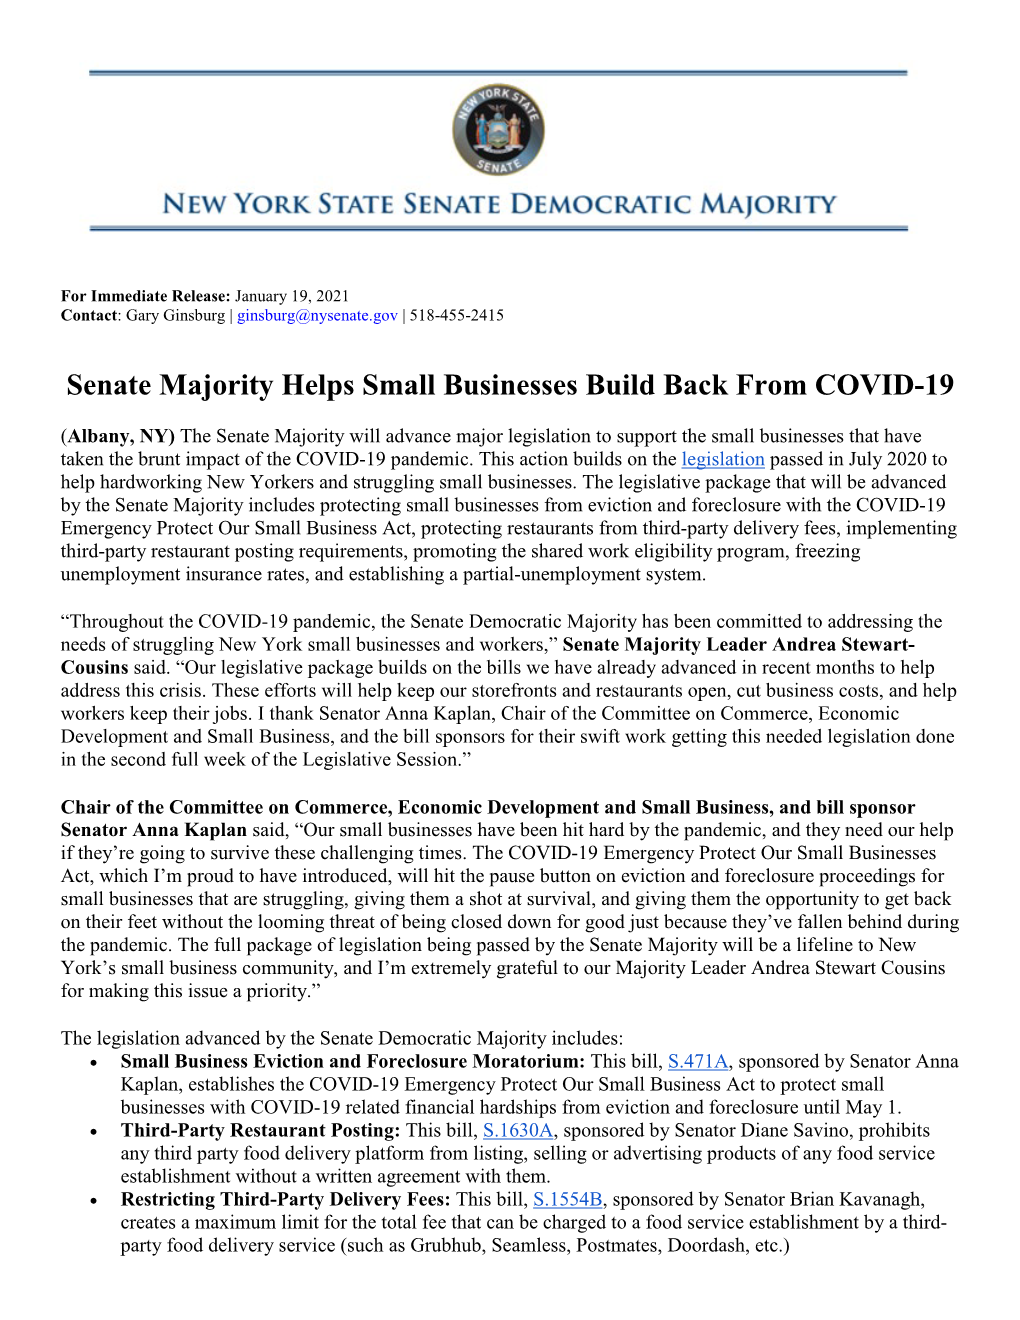 Senate Majority Helps Small Businesses Build Back from COVID-19